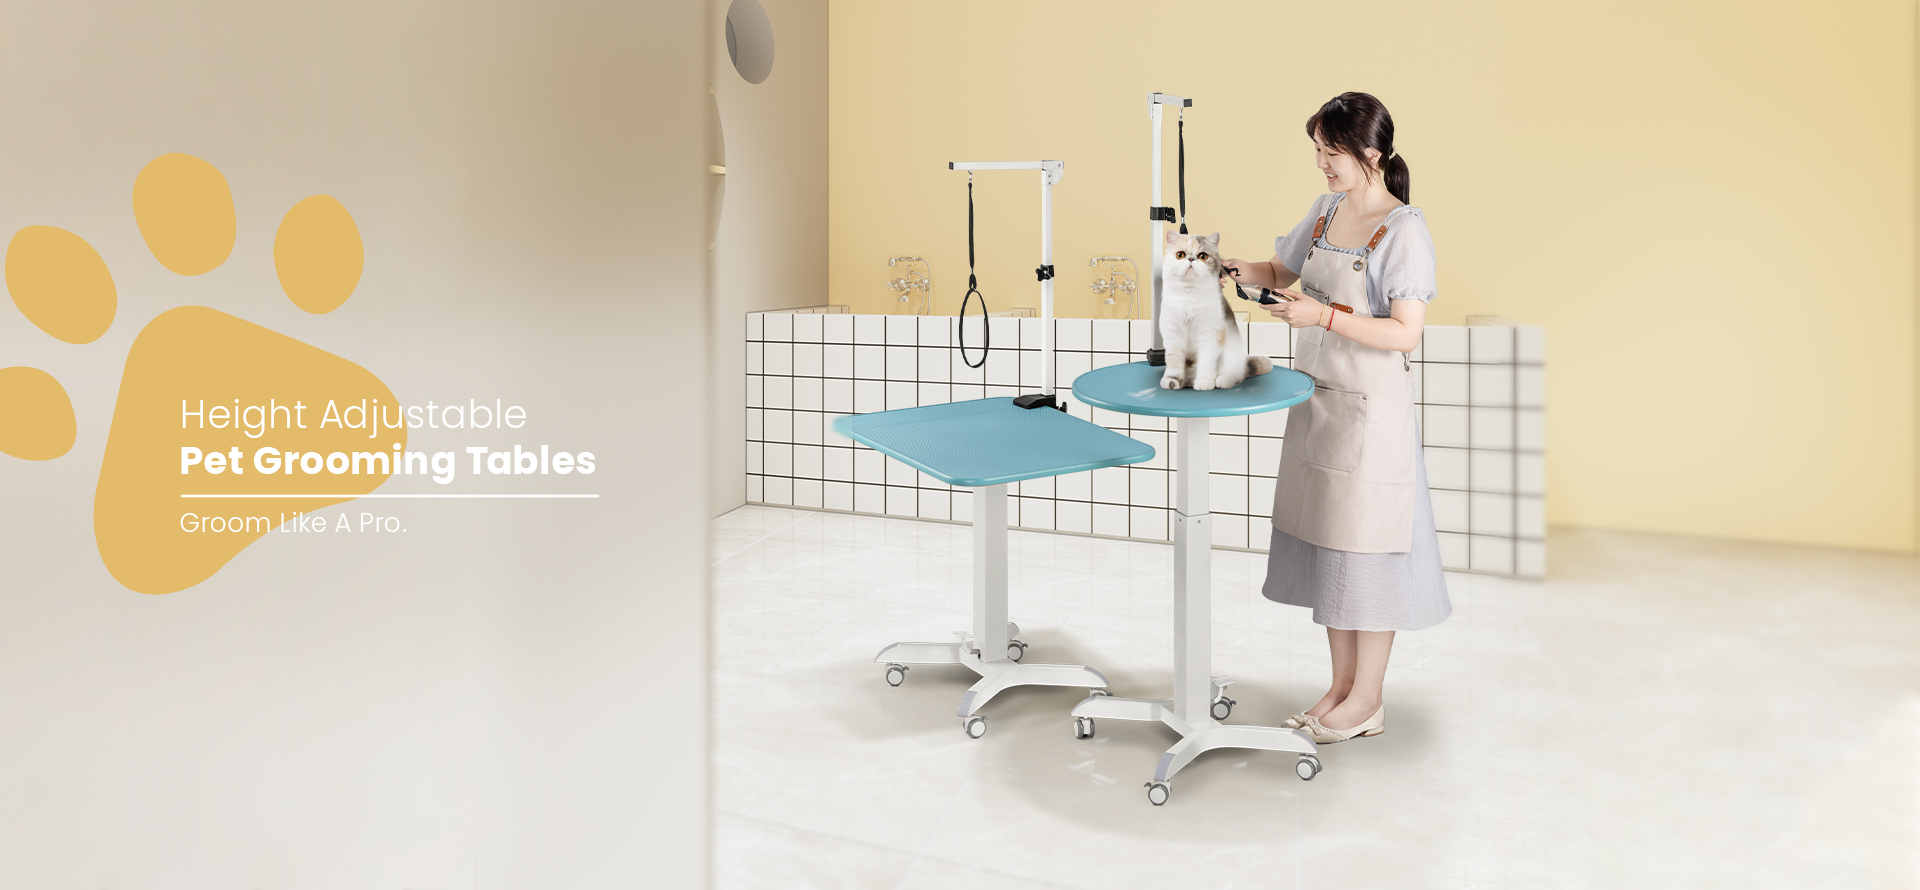 Height Adjustable Pet Grooming Tables